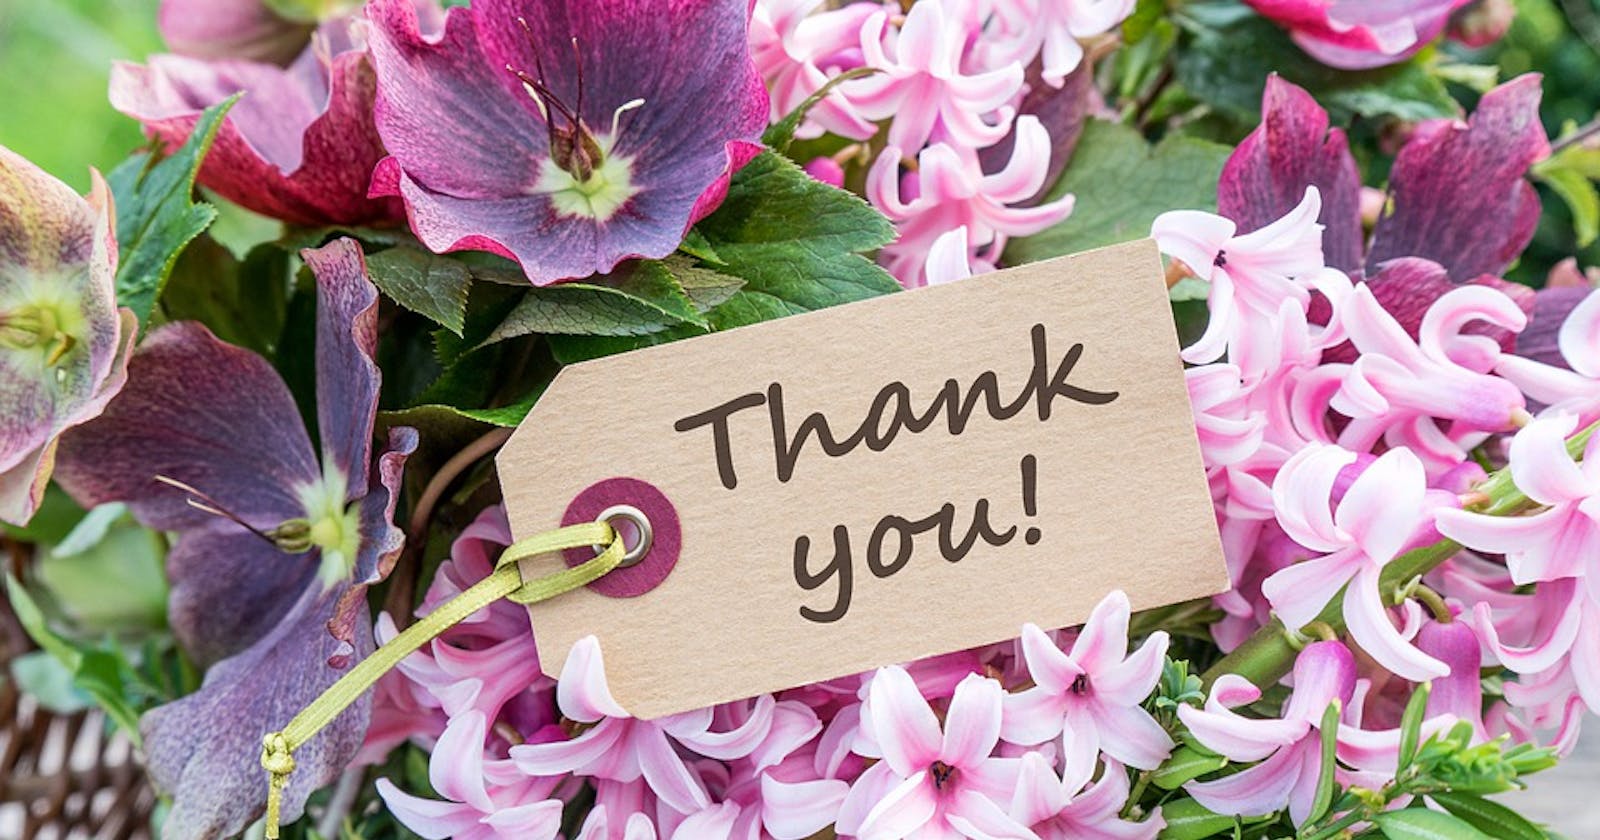 Here's the Best Thank You Flower Bouquet You Can Get